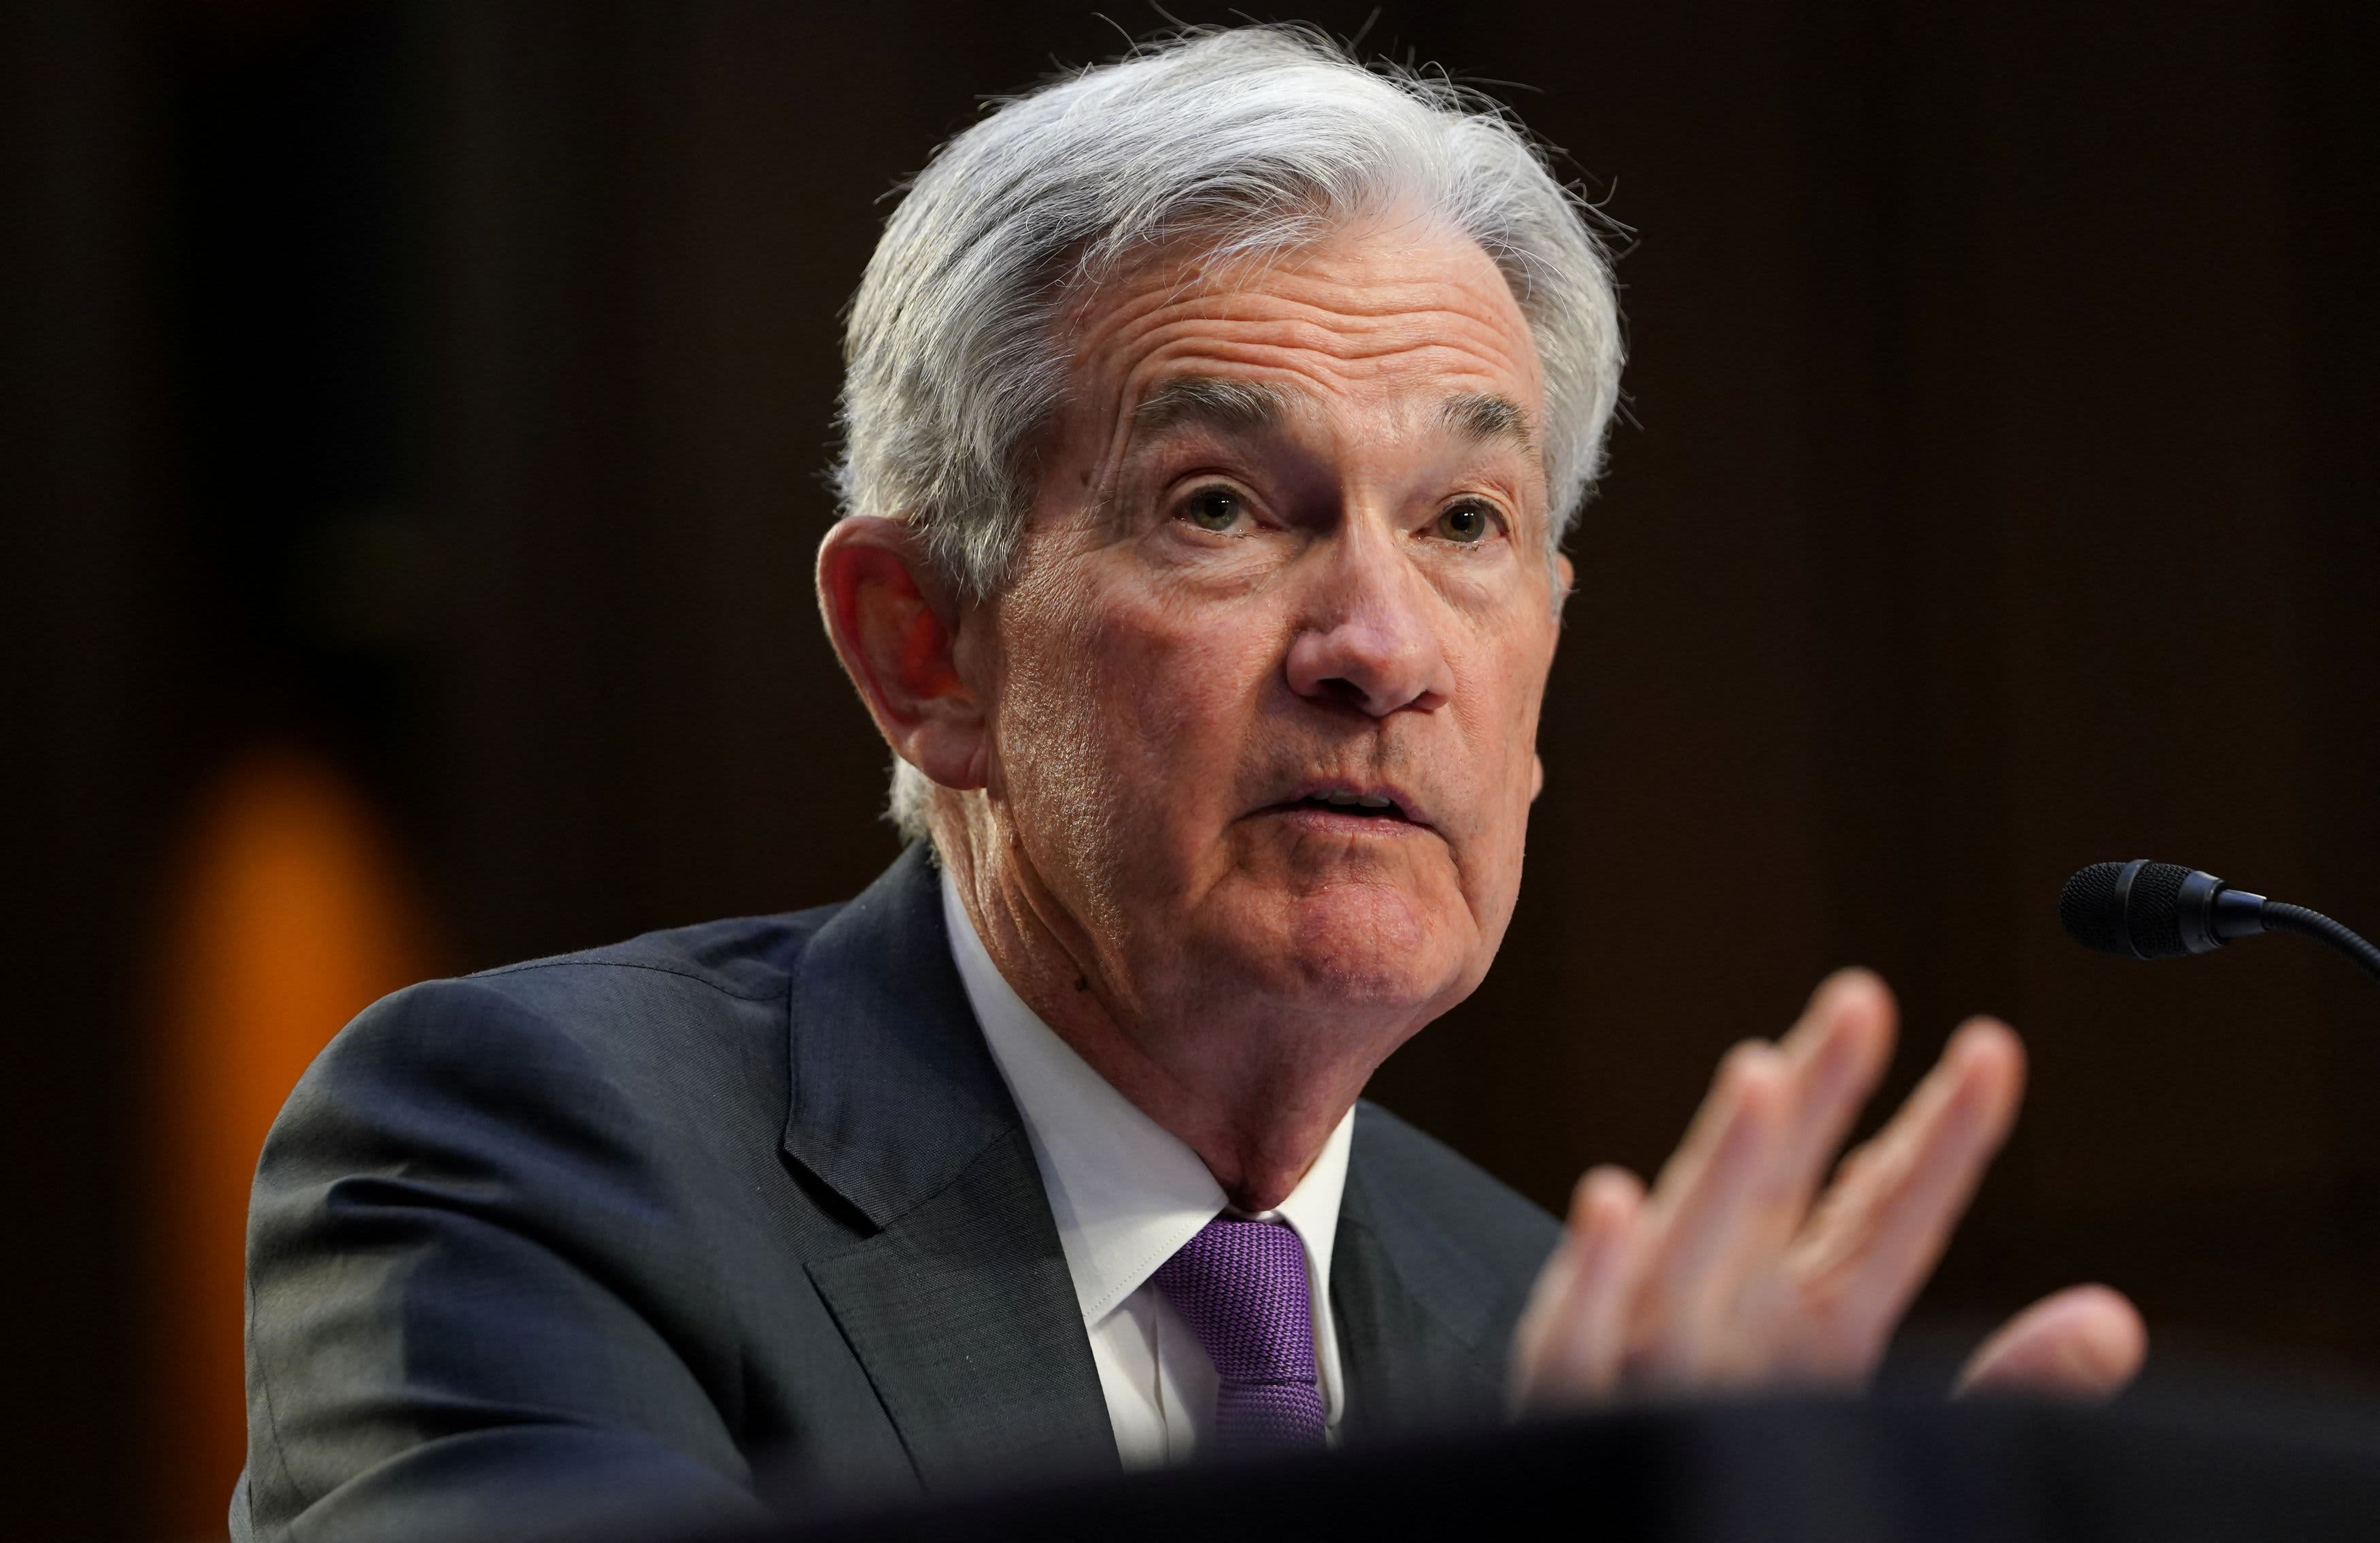 The economist says there is no exit ramp for Powell from the Fed until it triggers a recession